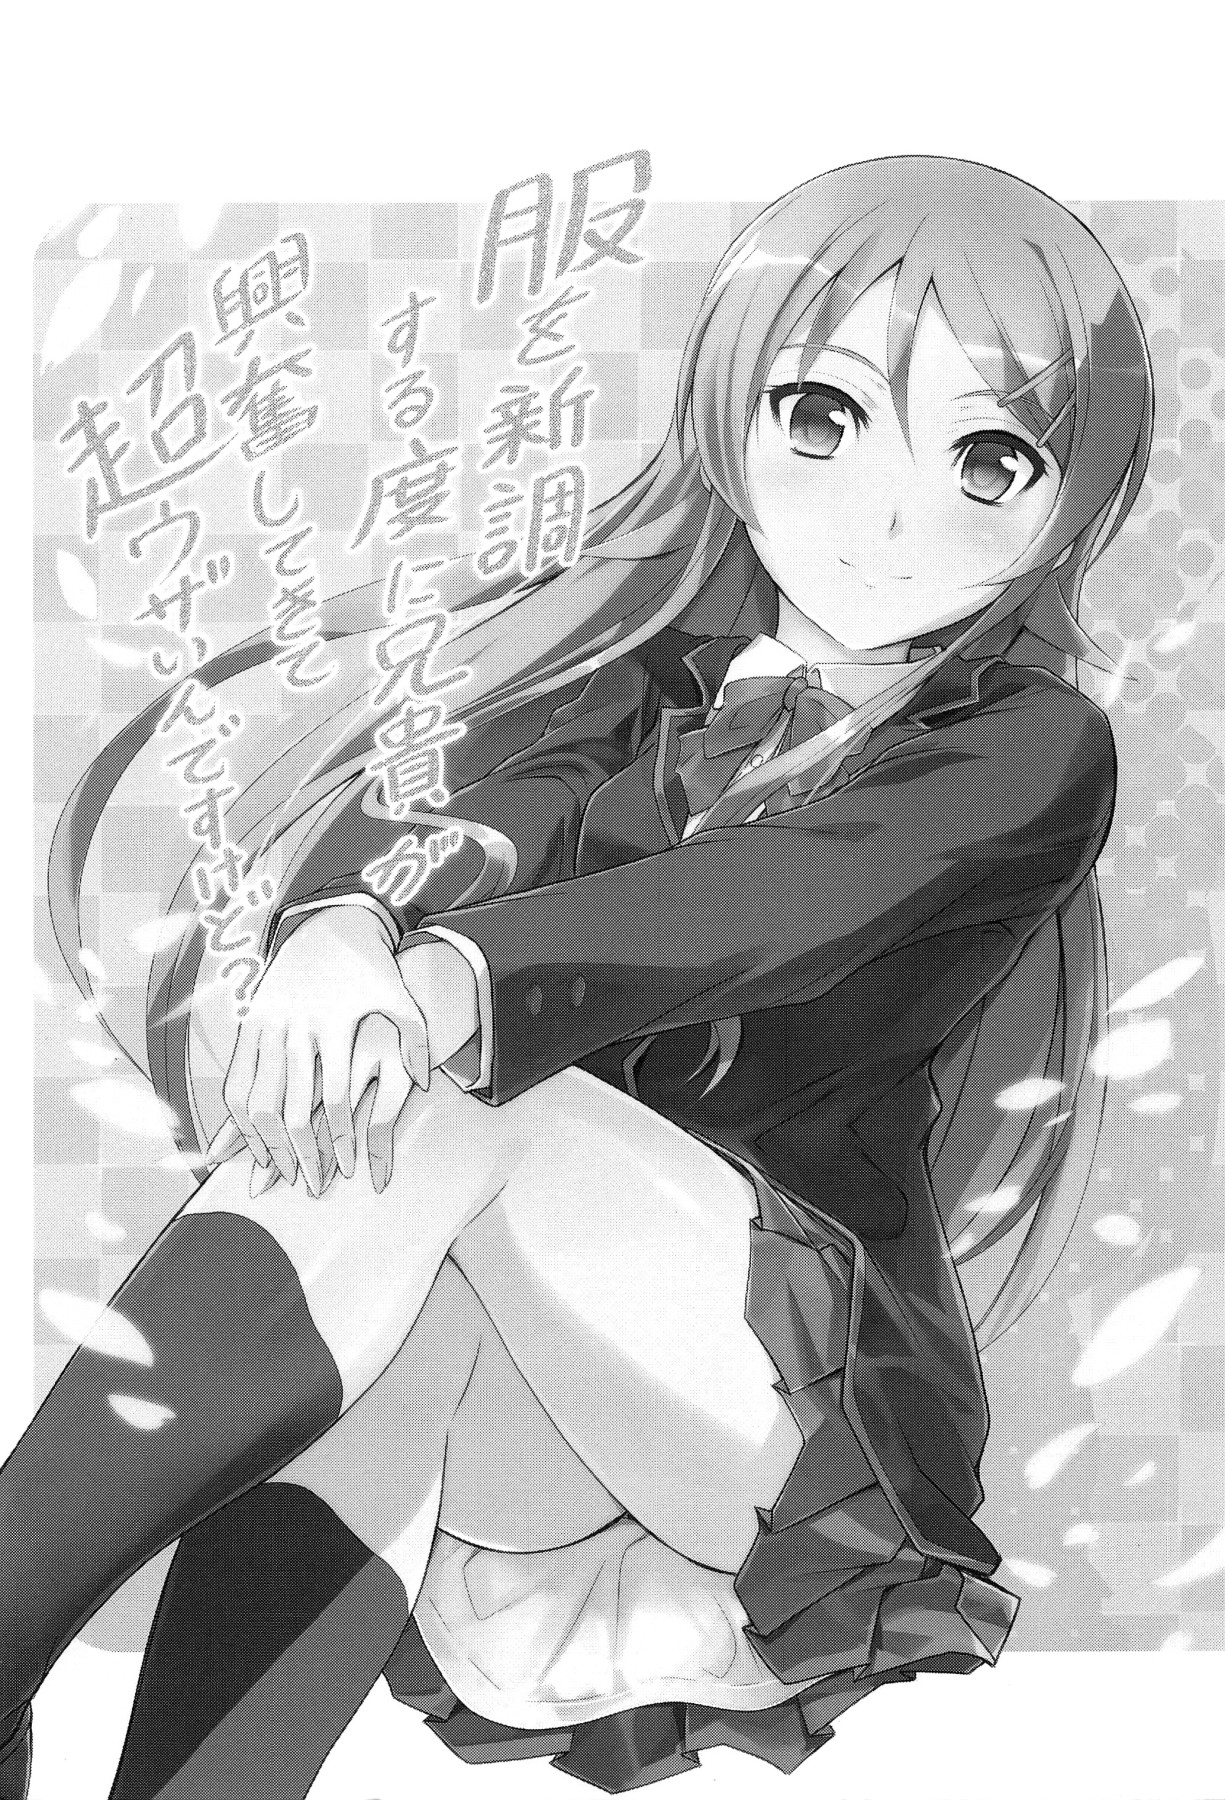 Hentai Manga Comic-My Older Brother Gets Aroused And He's Super Annoying Whenever I Wear New Clothes.-Read-2